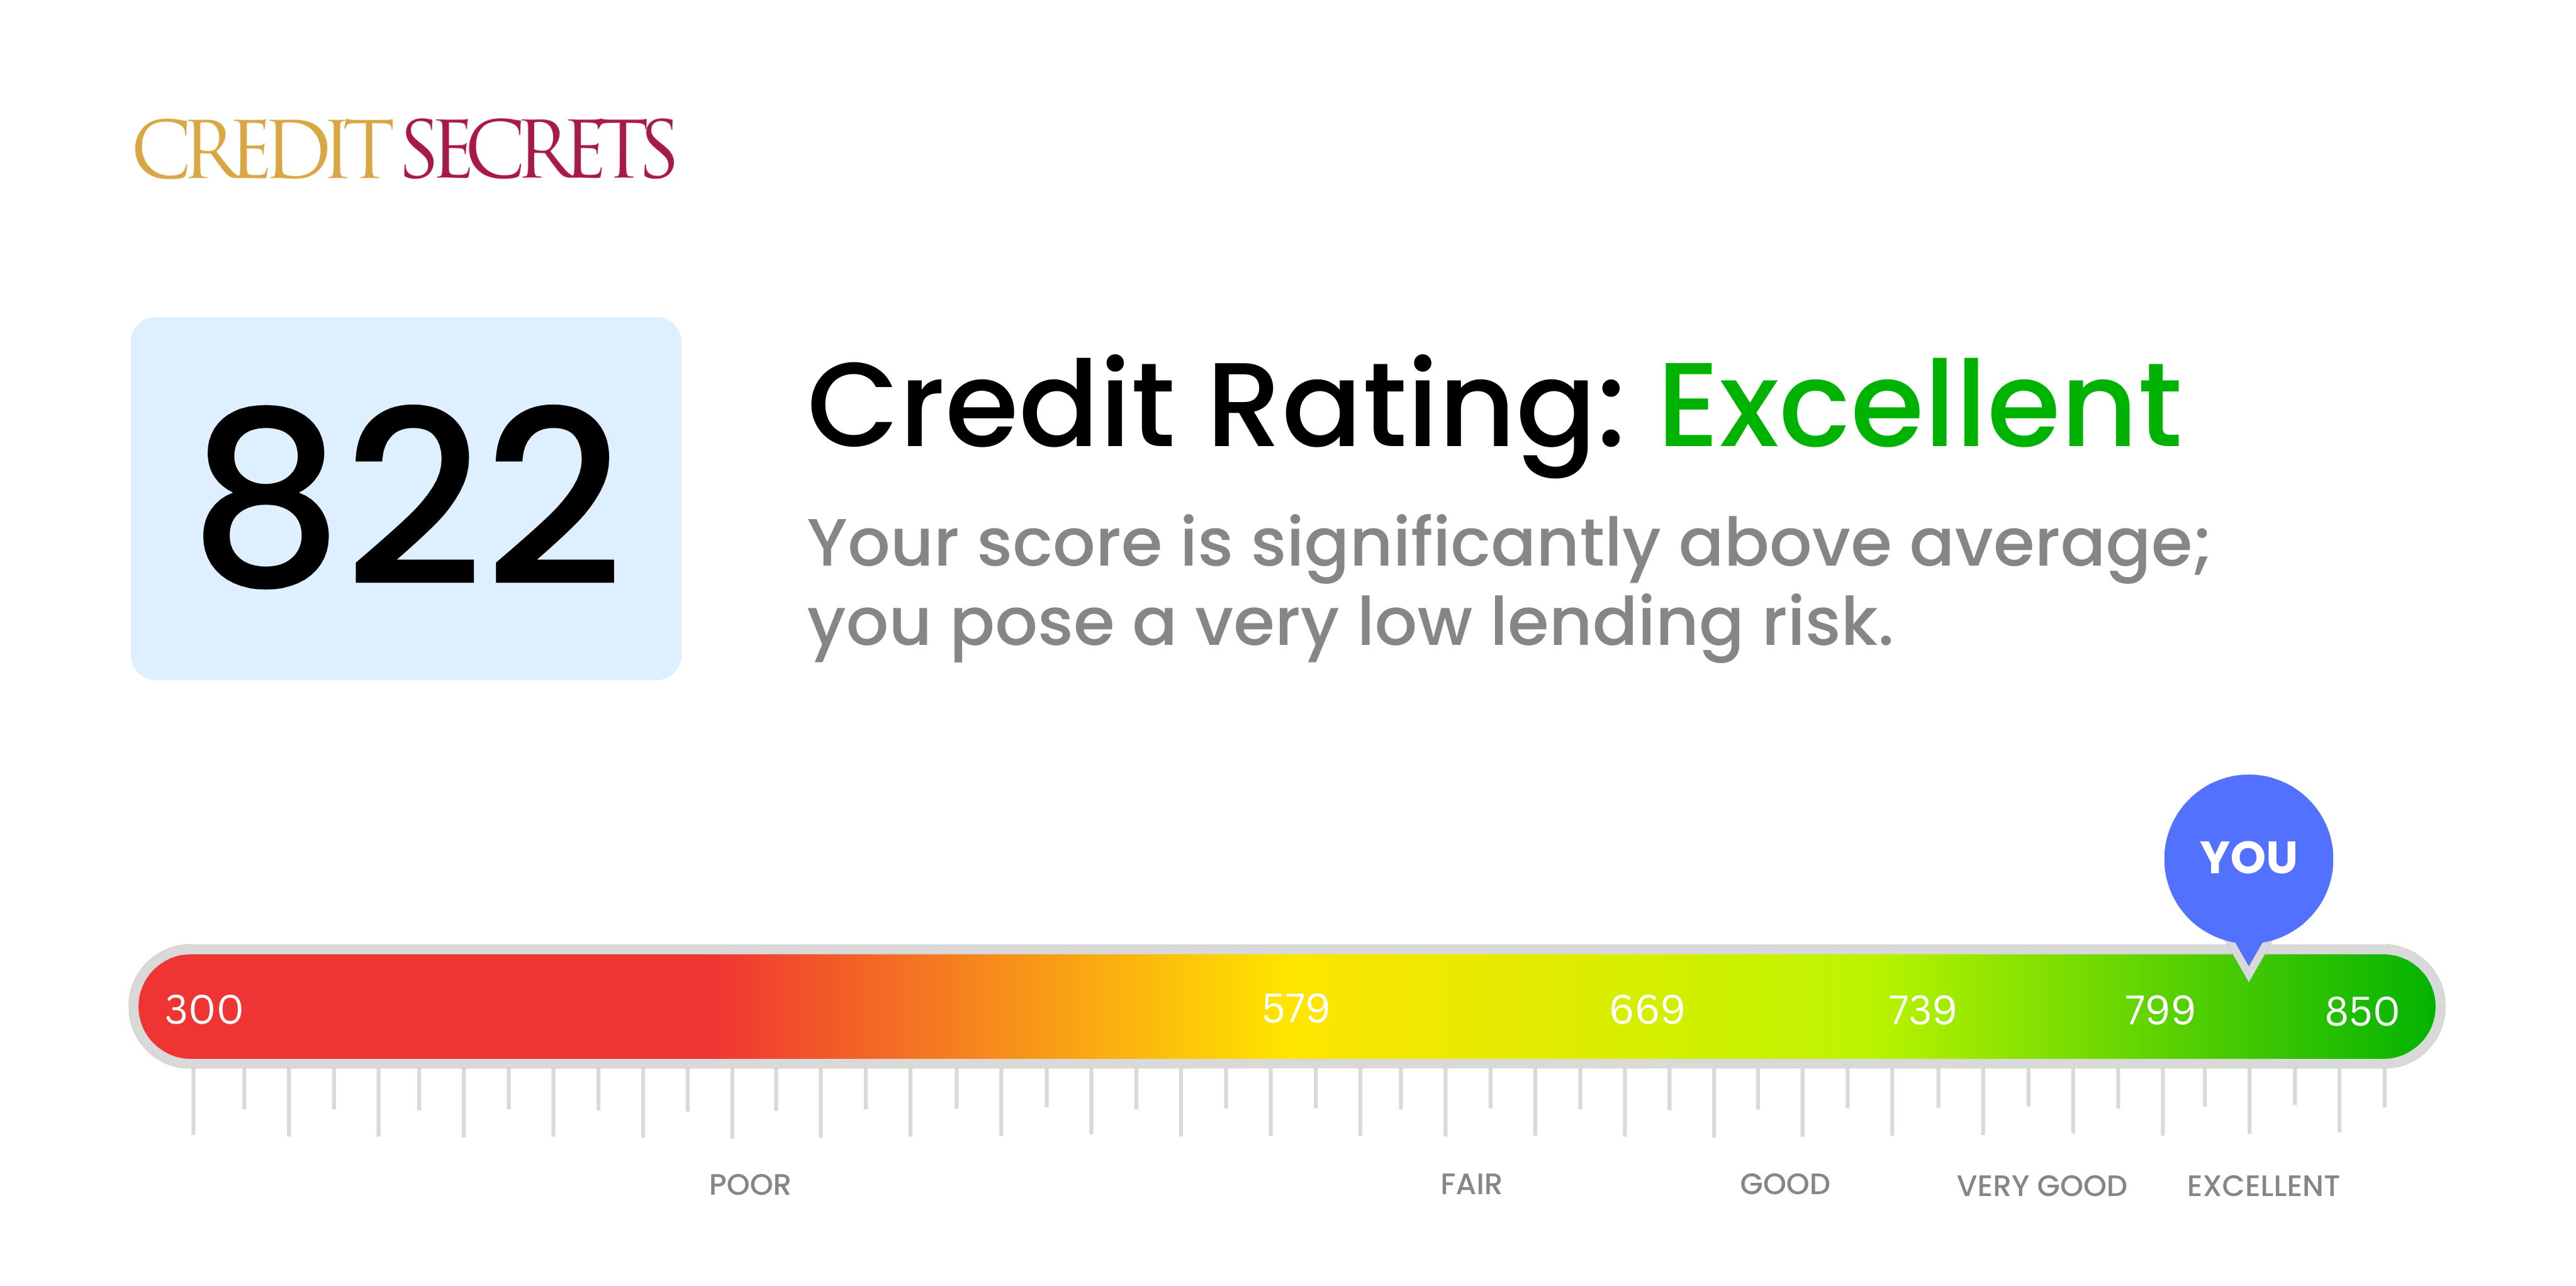 Is 822 a good credit score?